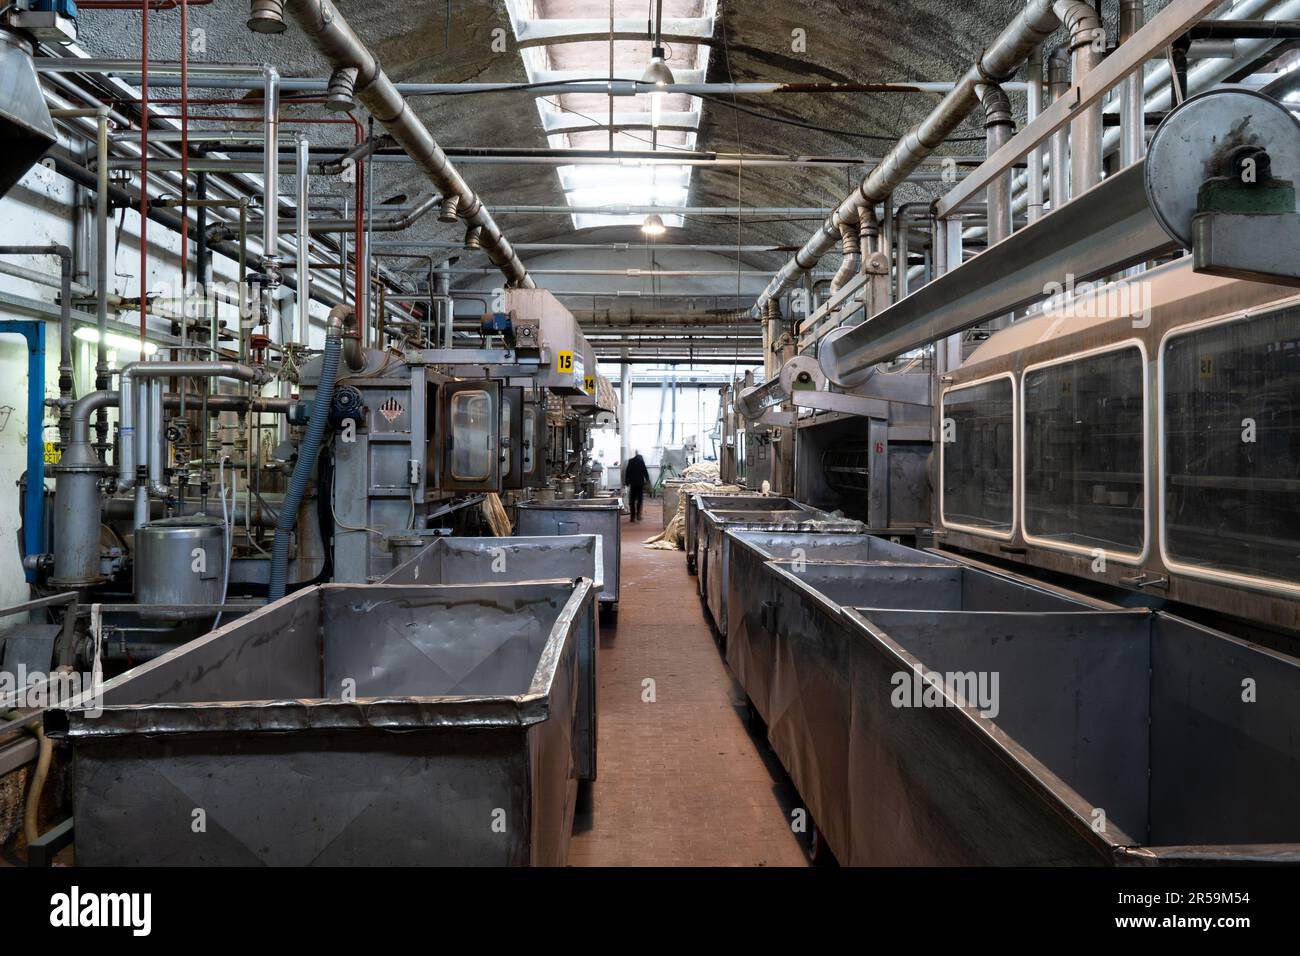 A textile factory in Prato, Italy. The textile district of Prato is the biggest cluster of Europe devoted to the production of wool yarns and fabrics. Stock Photo